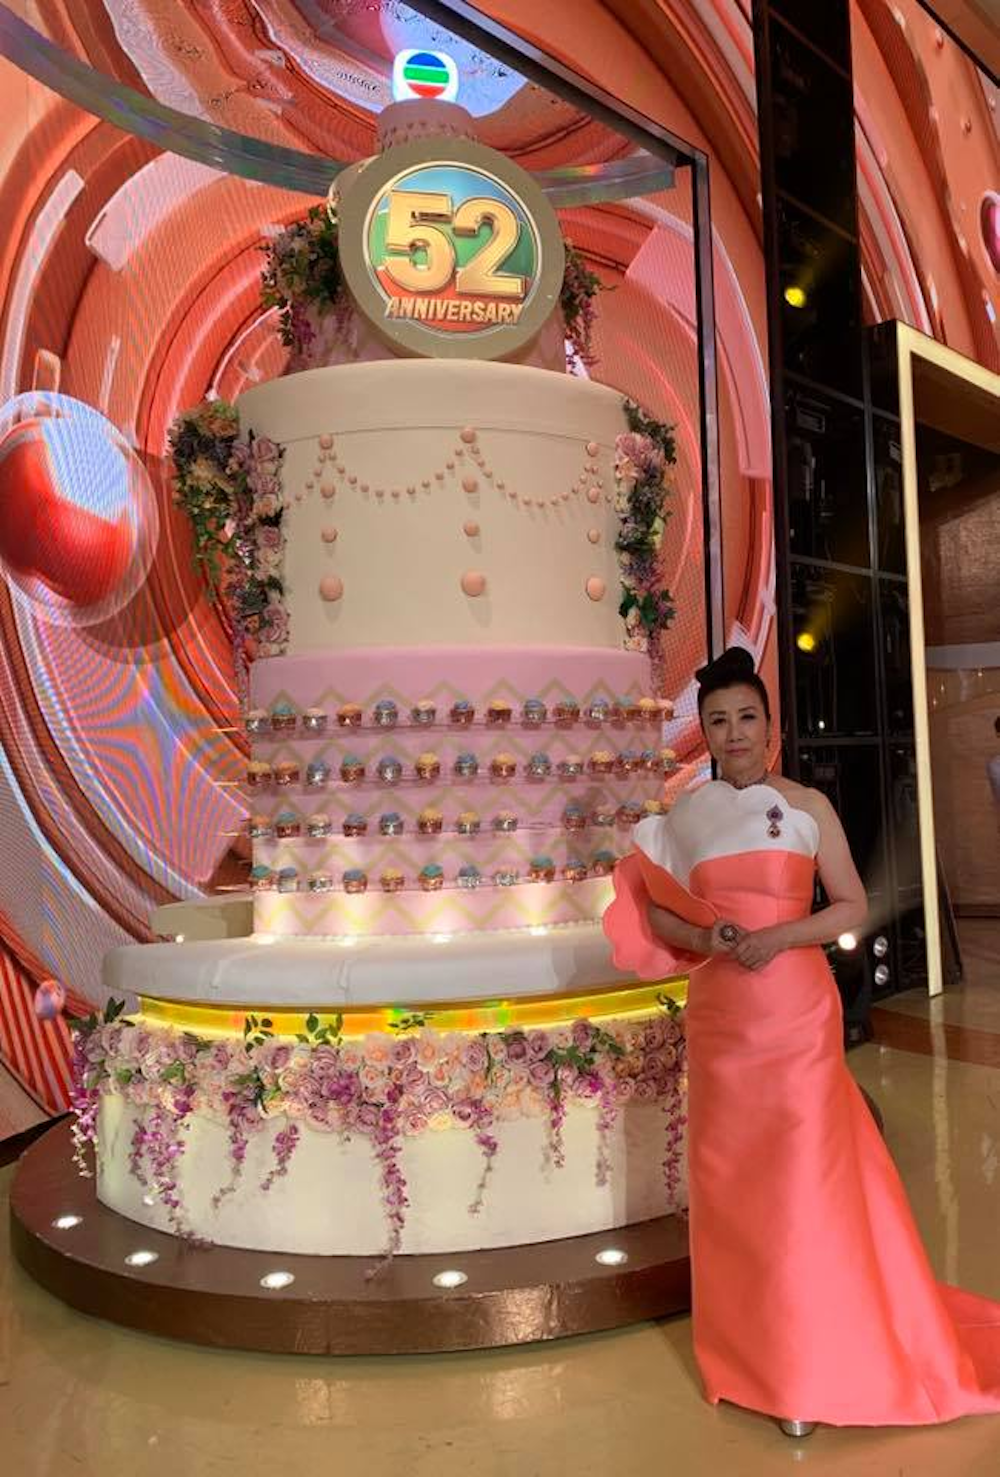 Co-host of the programme Hong Kong actress and singer Liza Wang with the anniversary cake in conjunction with TVB's 52nd anniversary celebration. u00e2u20acu201d Facebook/ Lizawangliza